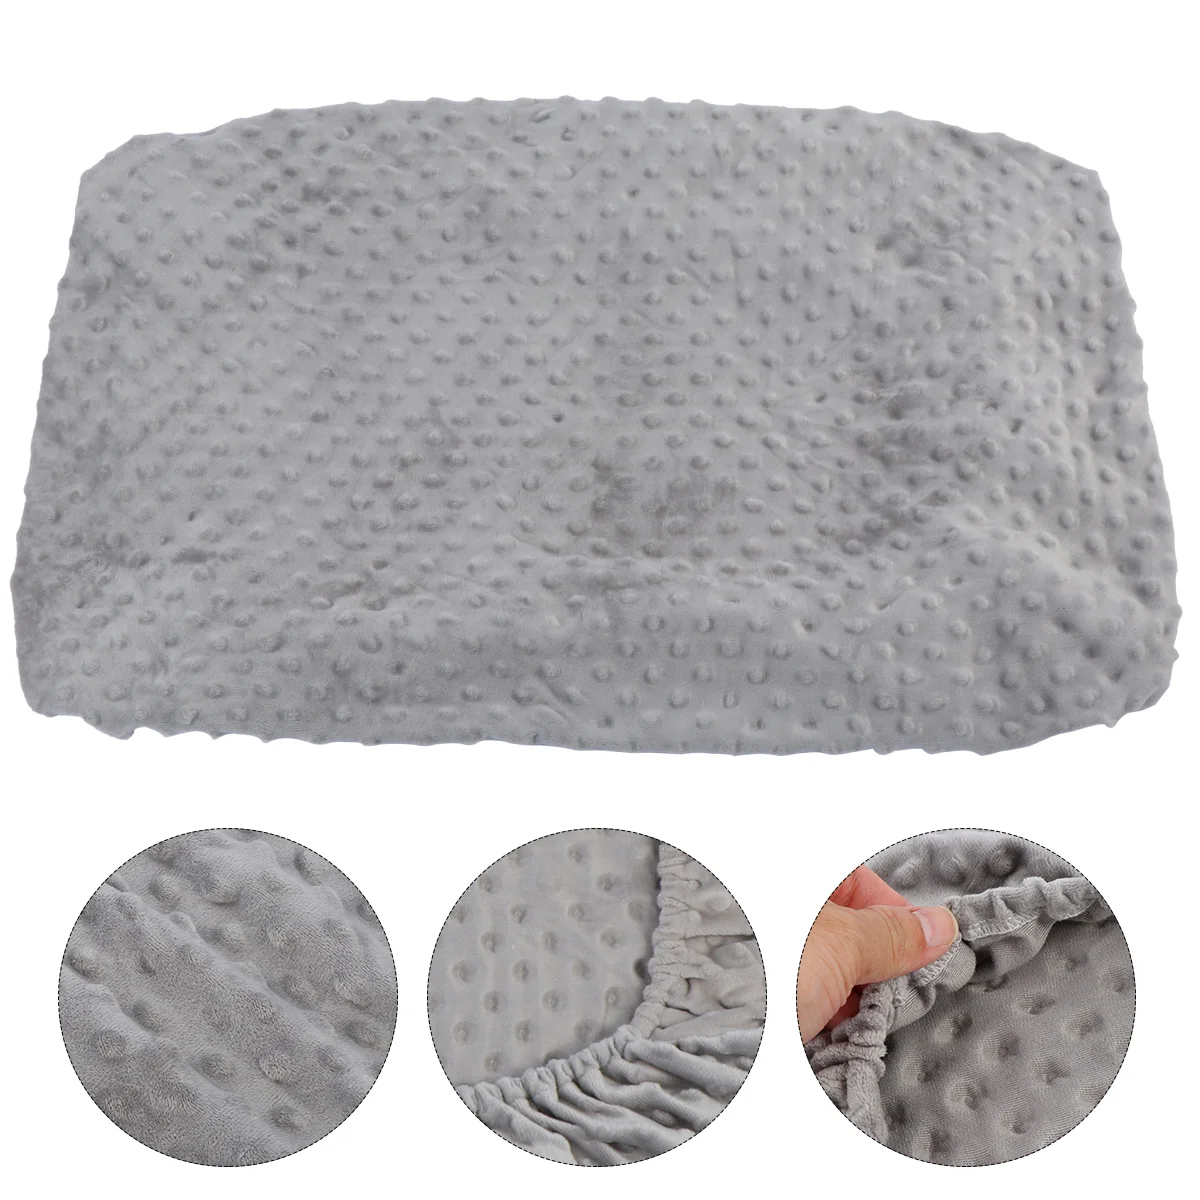 

Cover Massage Table Change Baby Diaper Pad Infants Changing Liners Shower Gift Breathable Cotton Cloth Nappy Nursery